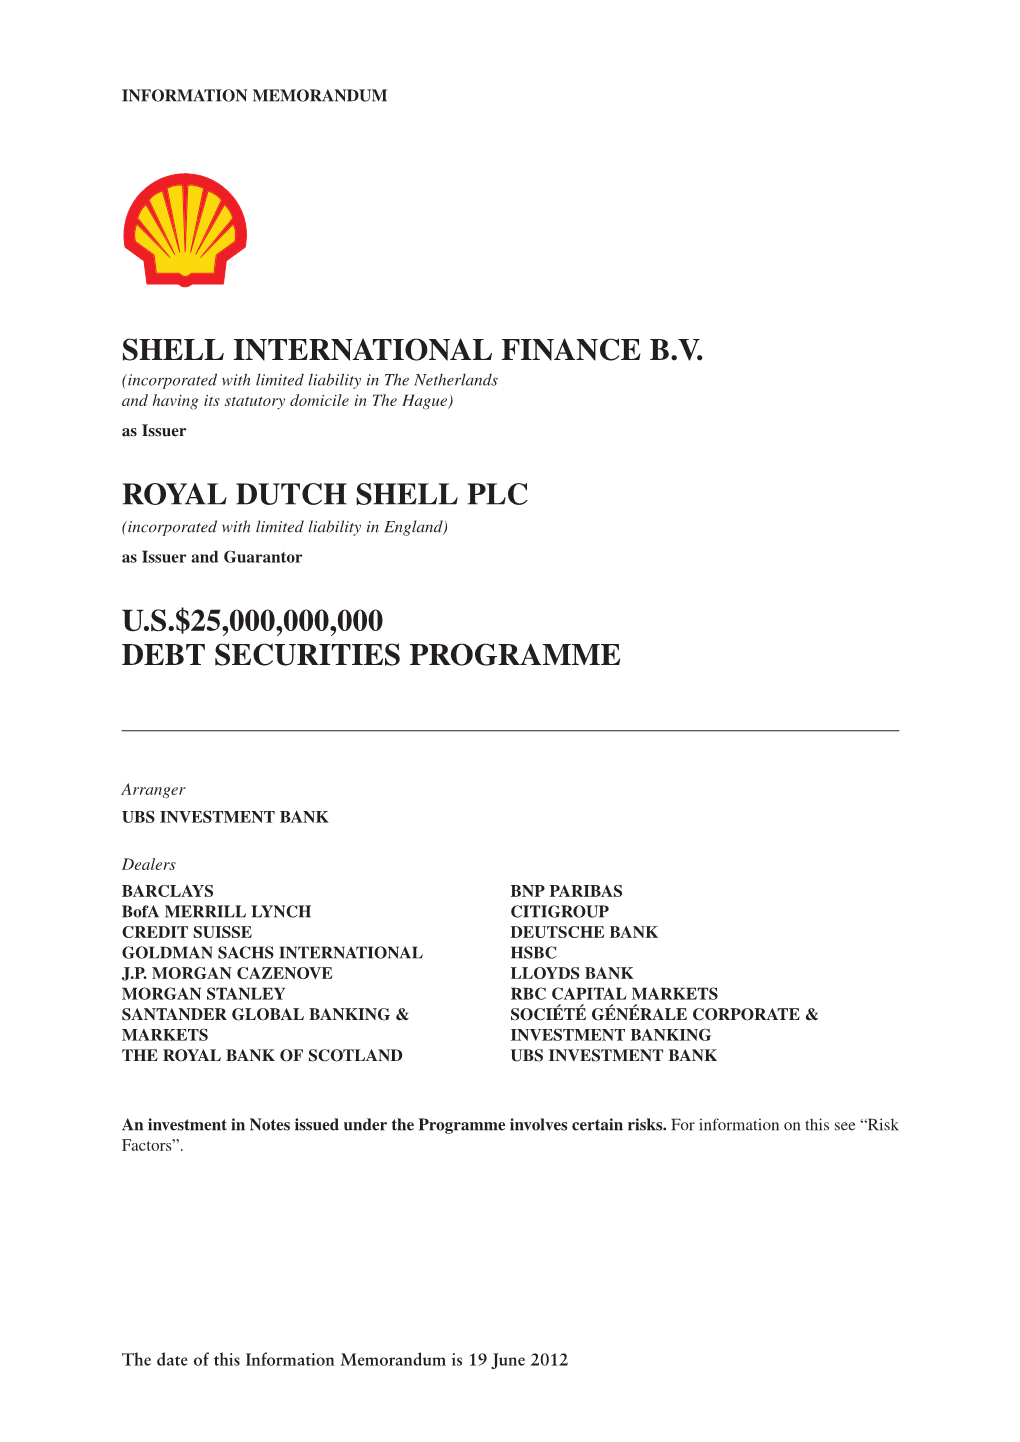 ROYAL DUTCH SHELL PLC (Incorporated with Limited Liability in England) As Issuer and Guarantor